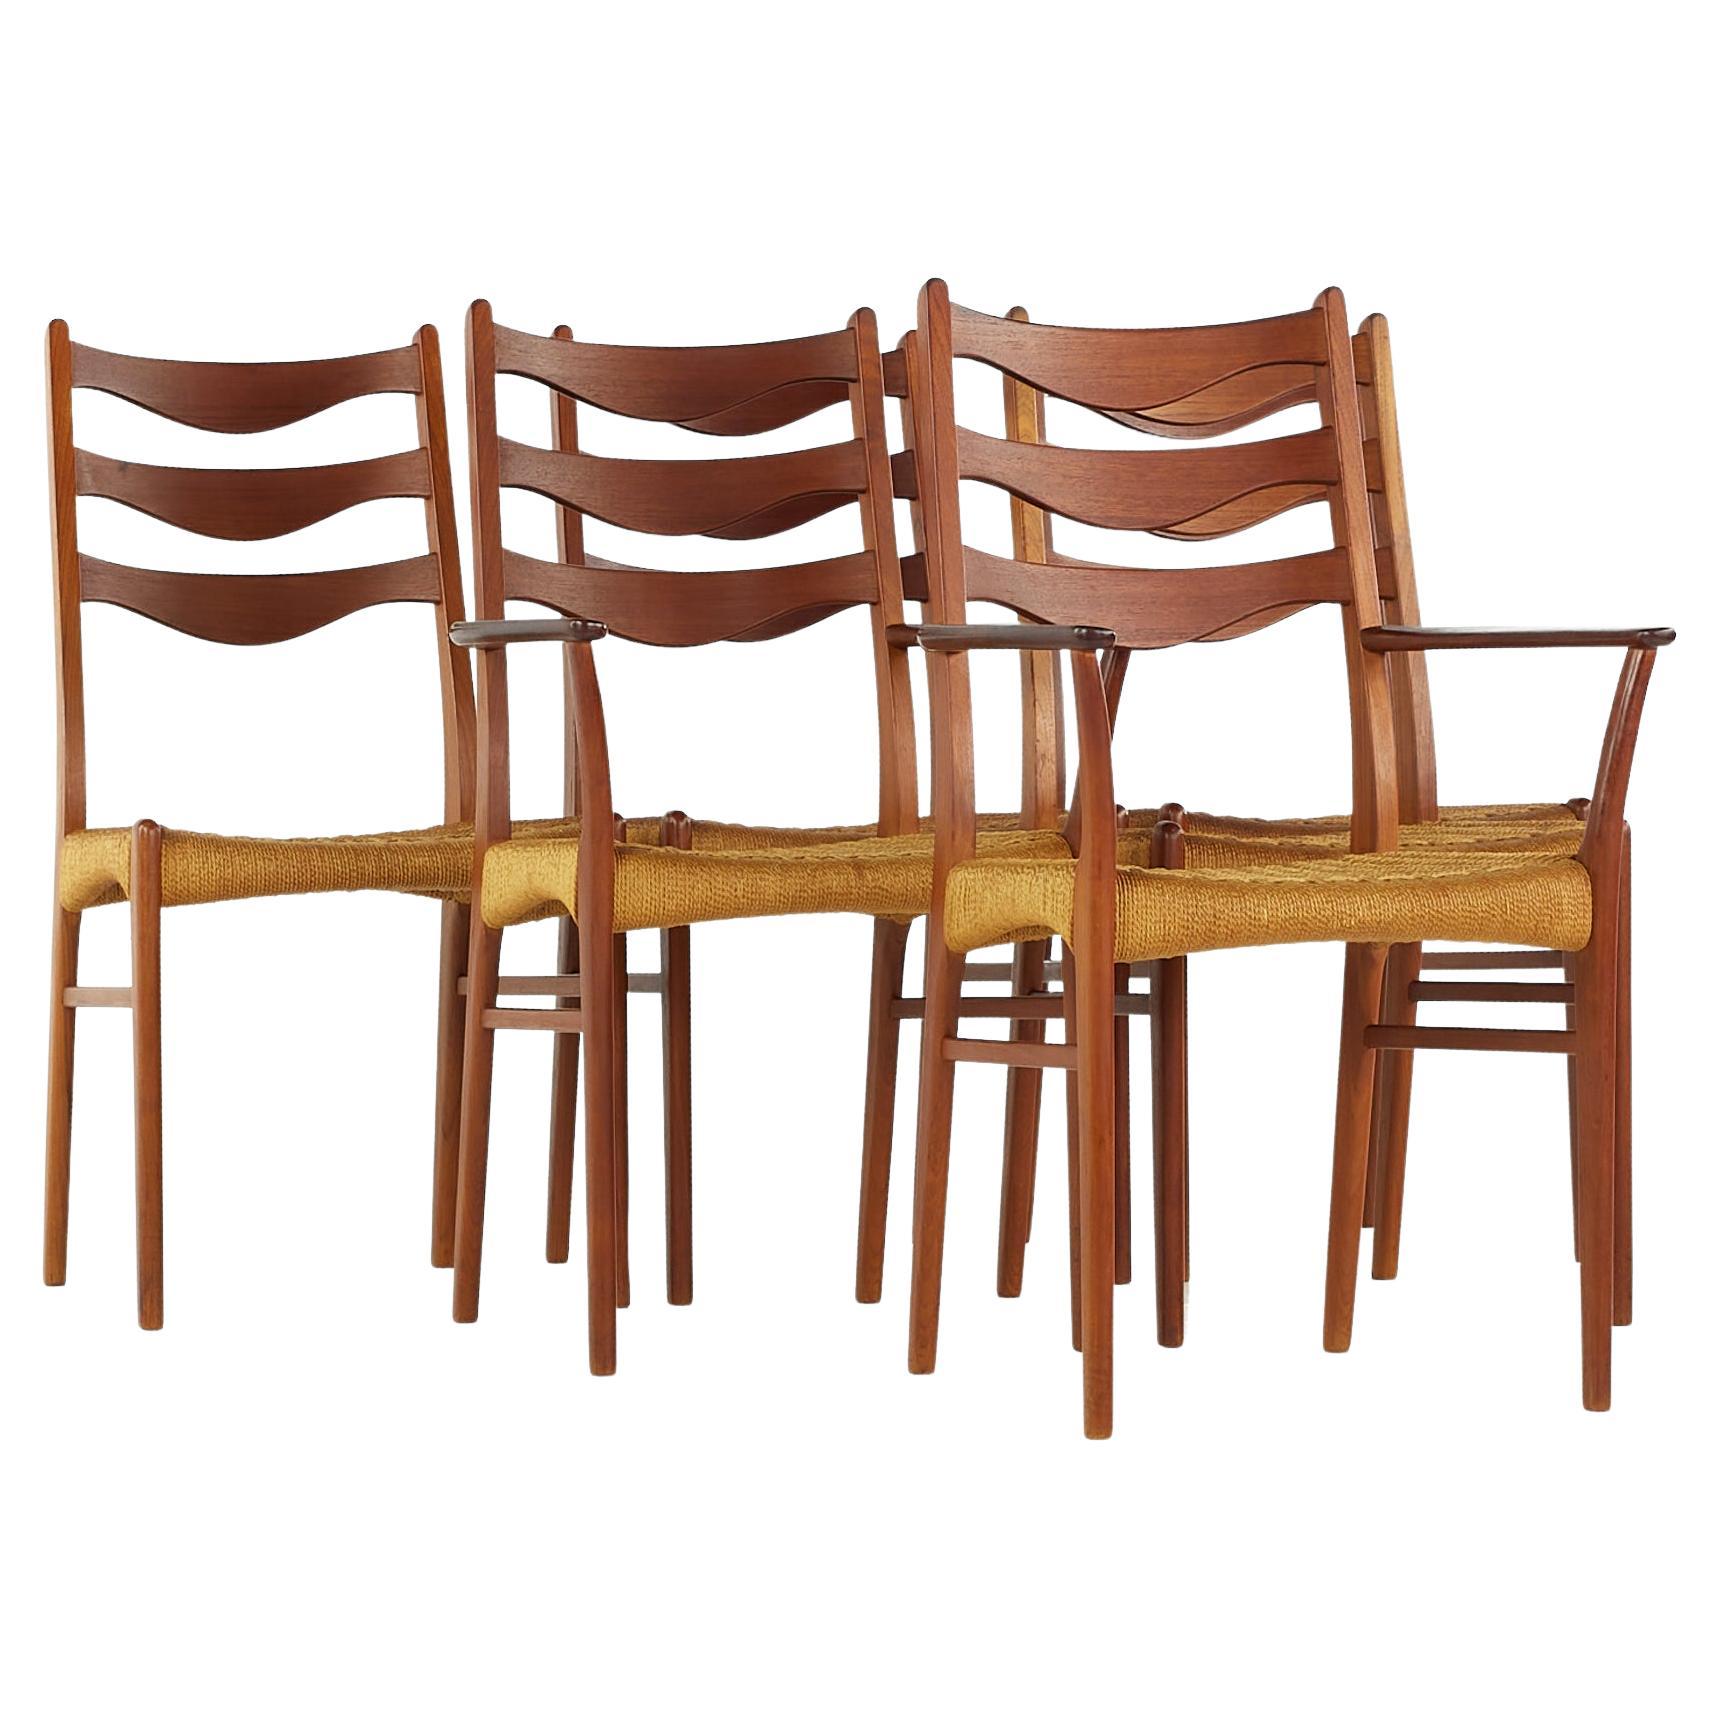 Arne Wahl Iversen GS90 MCM Danish Teak Dining Chairs with Rope Seats, Set of 6 For Sale